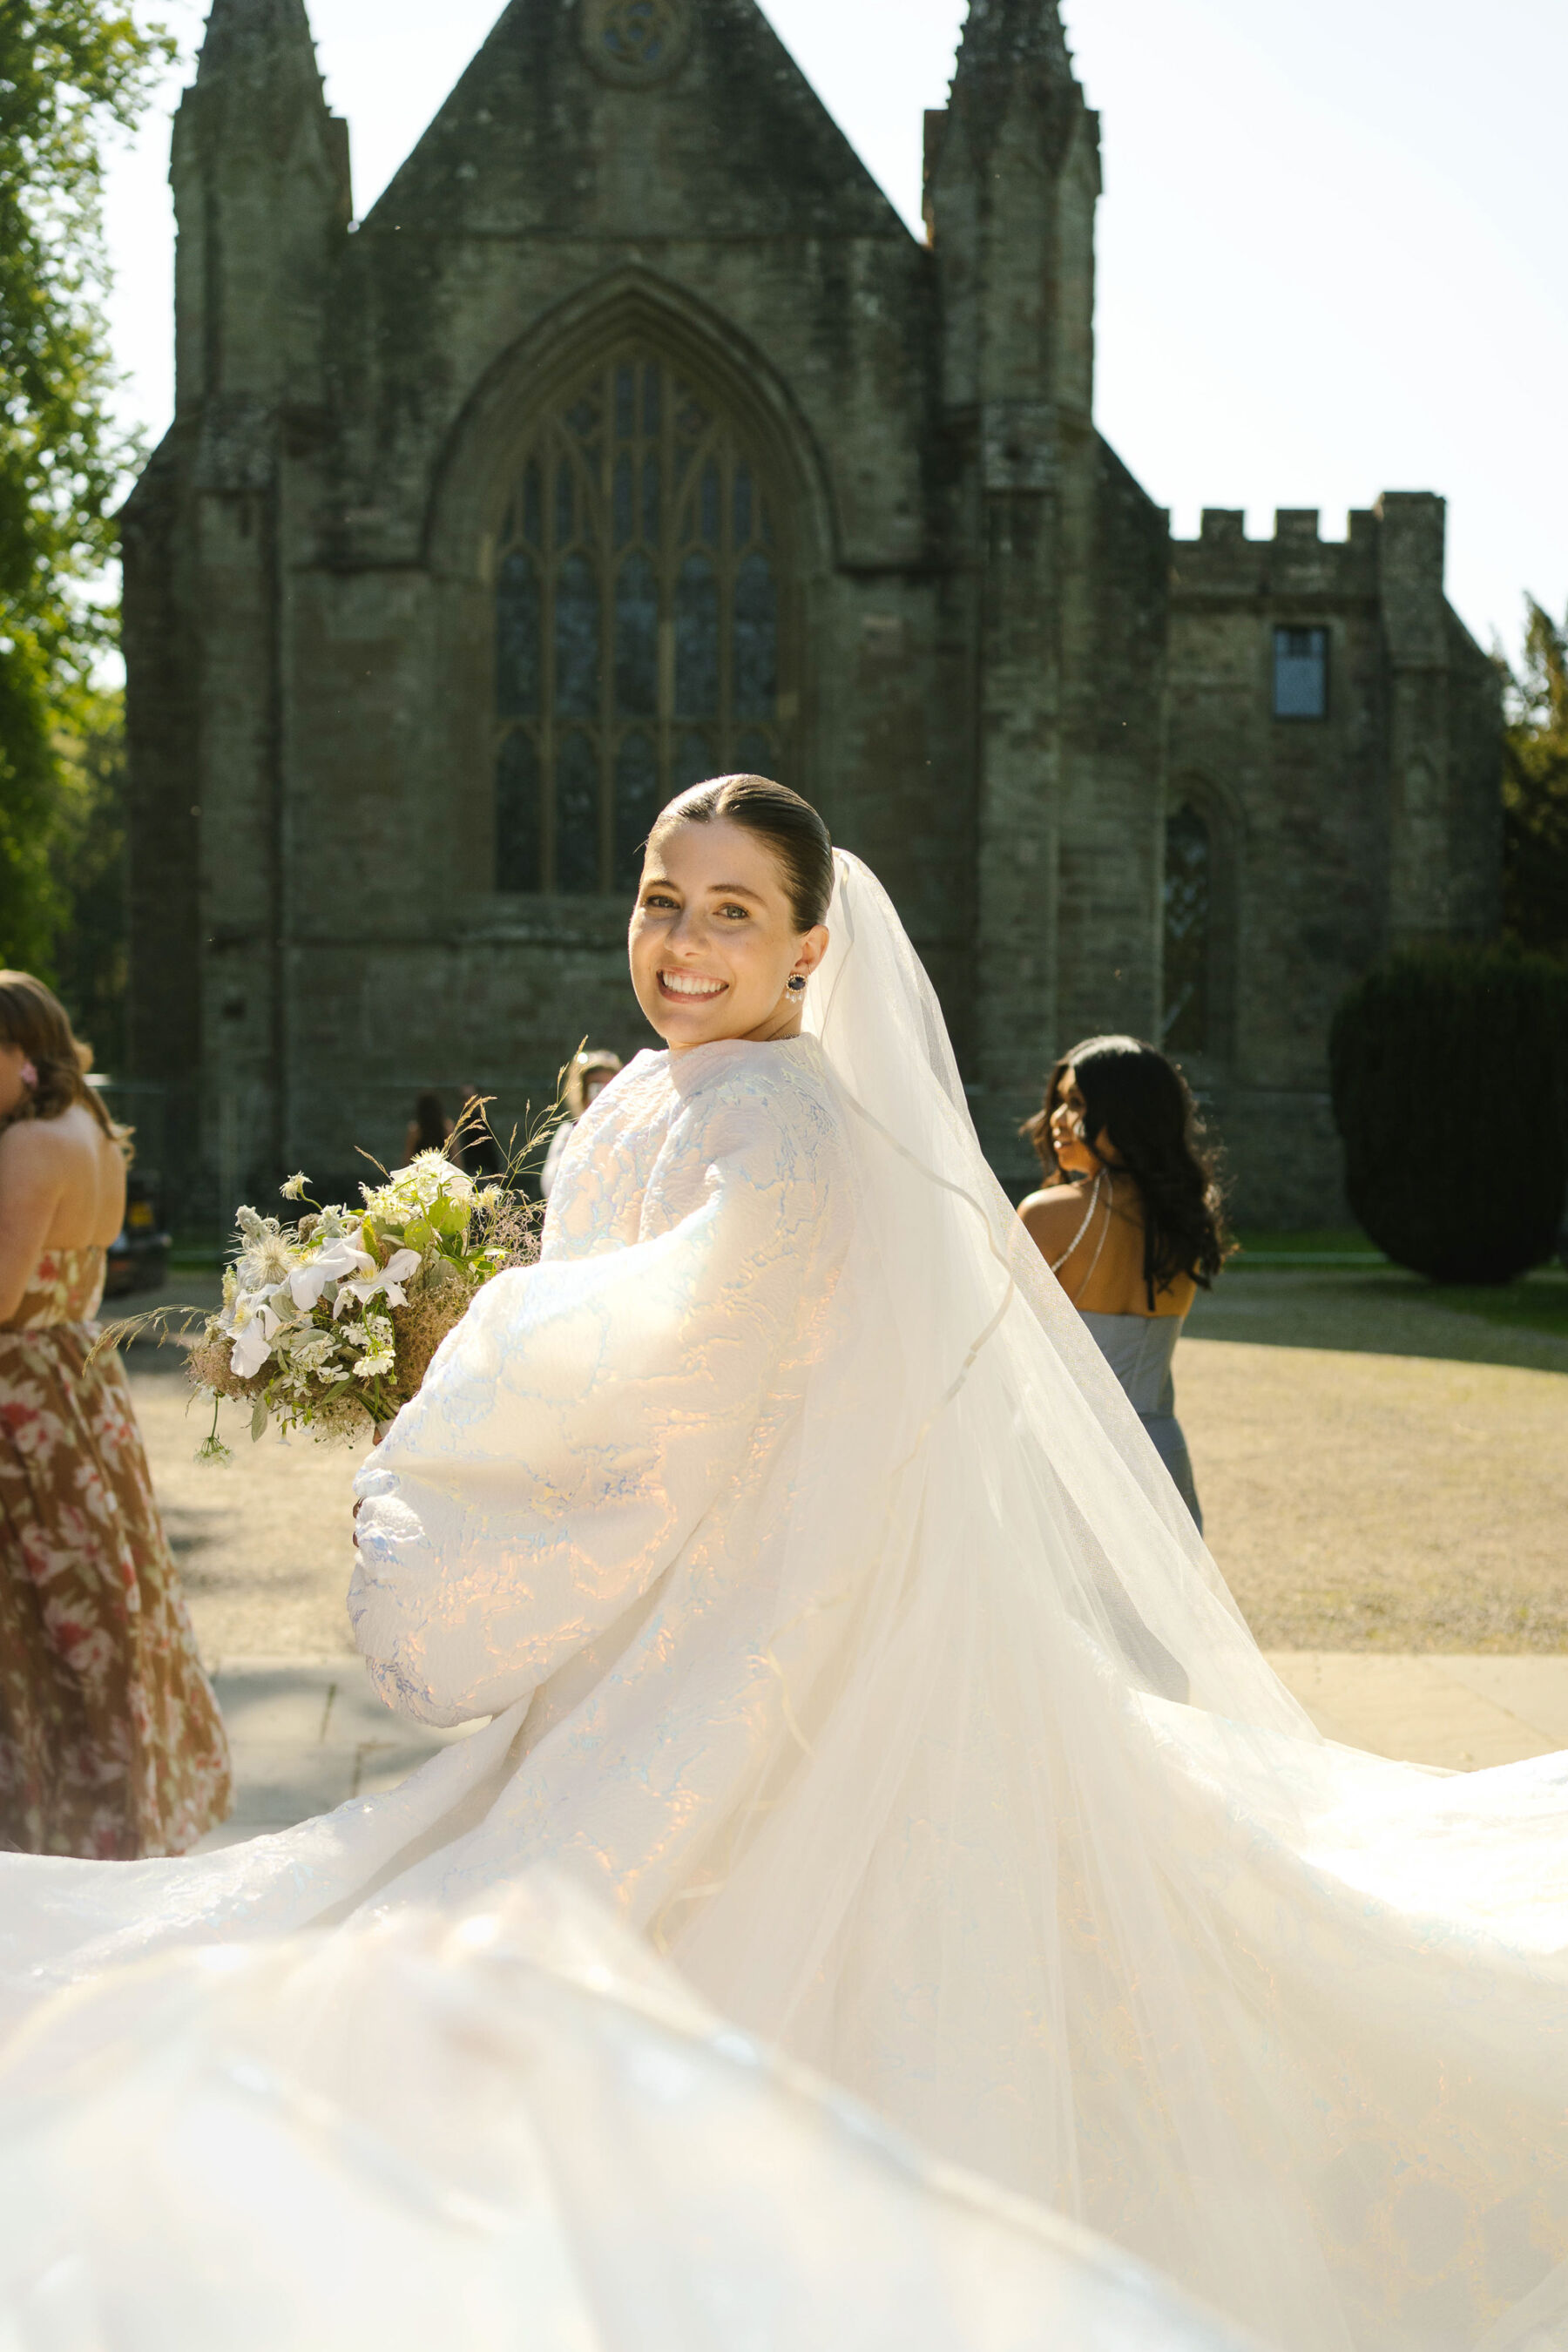 Bride wearing a billow sleeved Jesus Peiro coat and carrying a natural wedding bouquet by Joseph Massie.